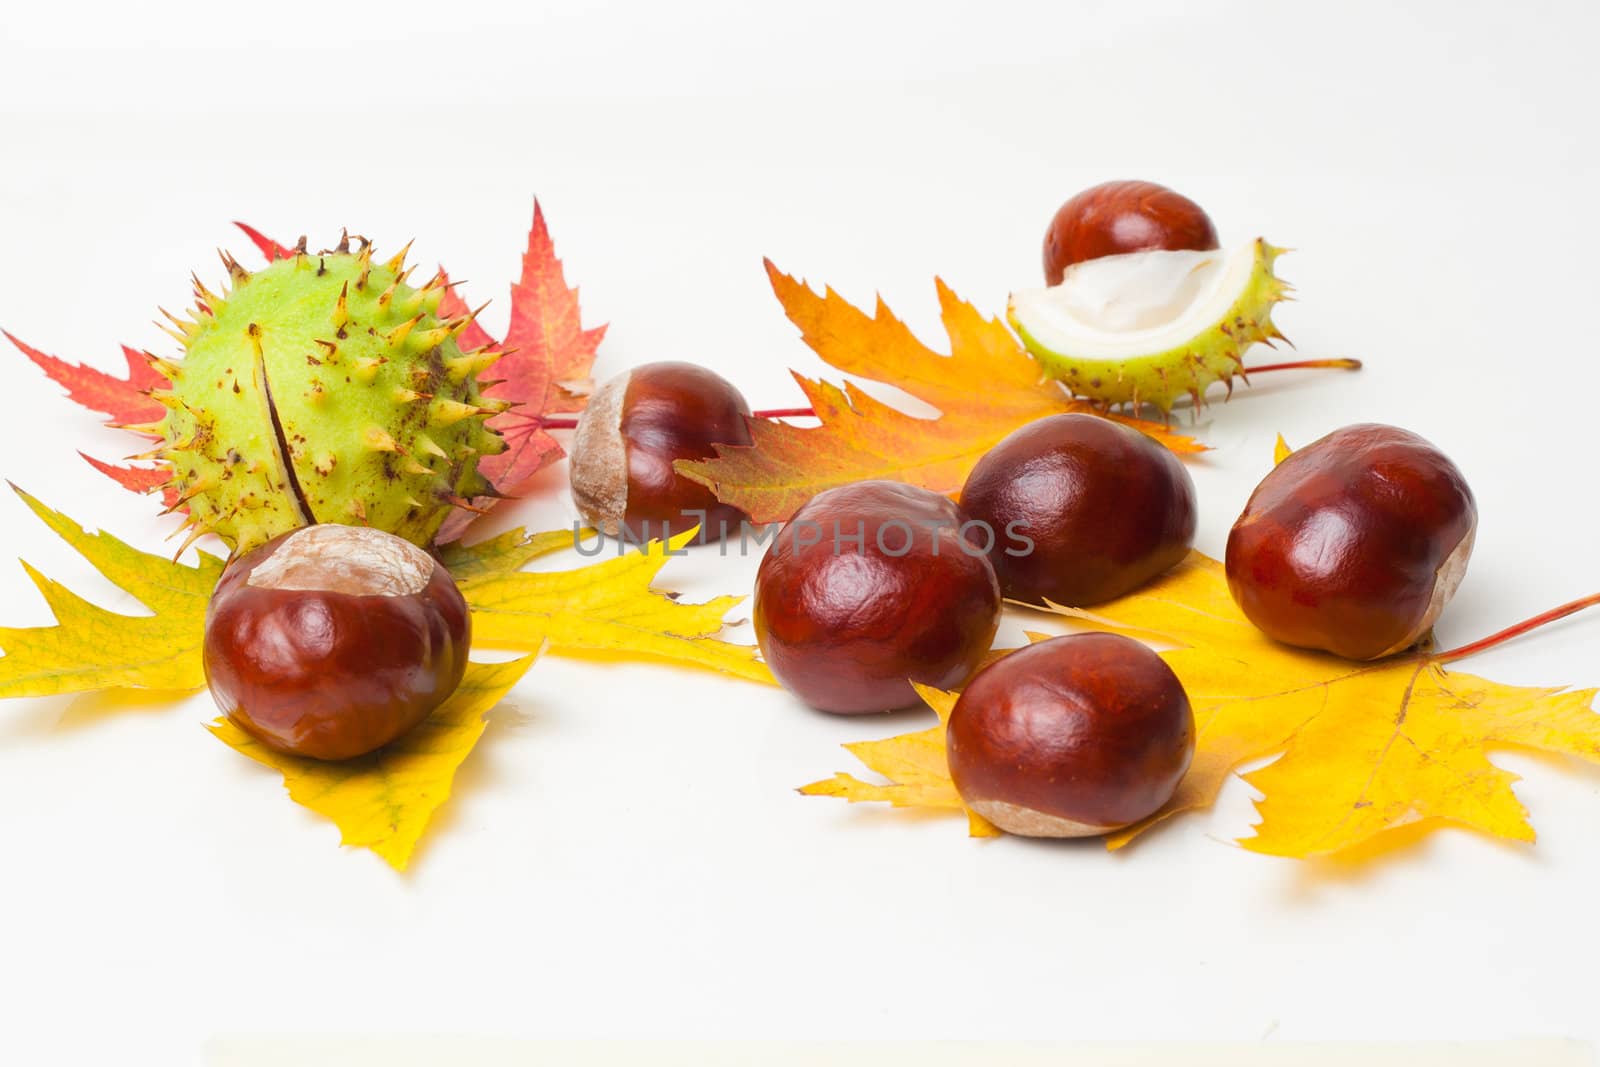 Chestnut with colorful leafs on white background